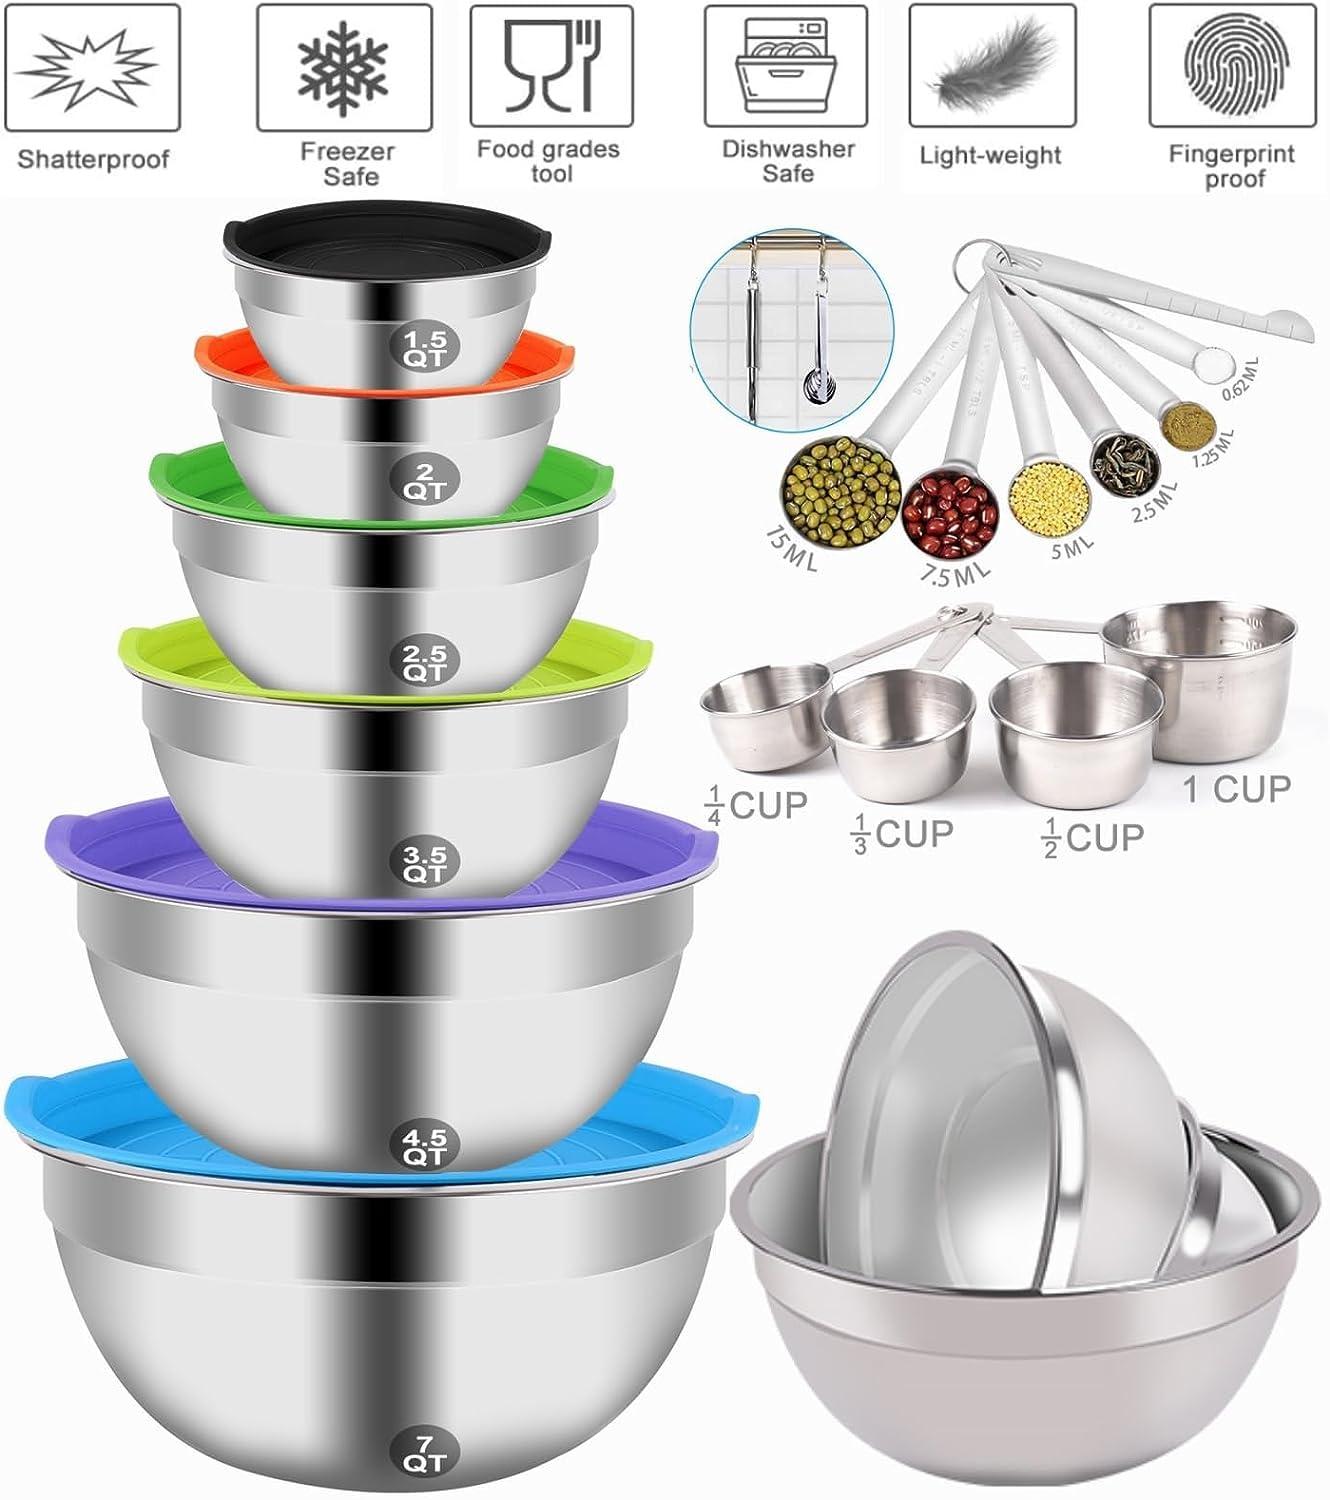 Mixing Bowls with Lid Set, 23PCS Kitchen Utensils Metal Bowl Stainless Steel Nesting Bowls, Measuring Cups and Spoons, Egg Whisk for Baking Prepping Cooking Serving Supplies - CookCave